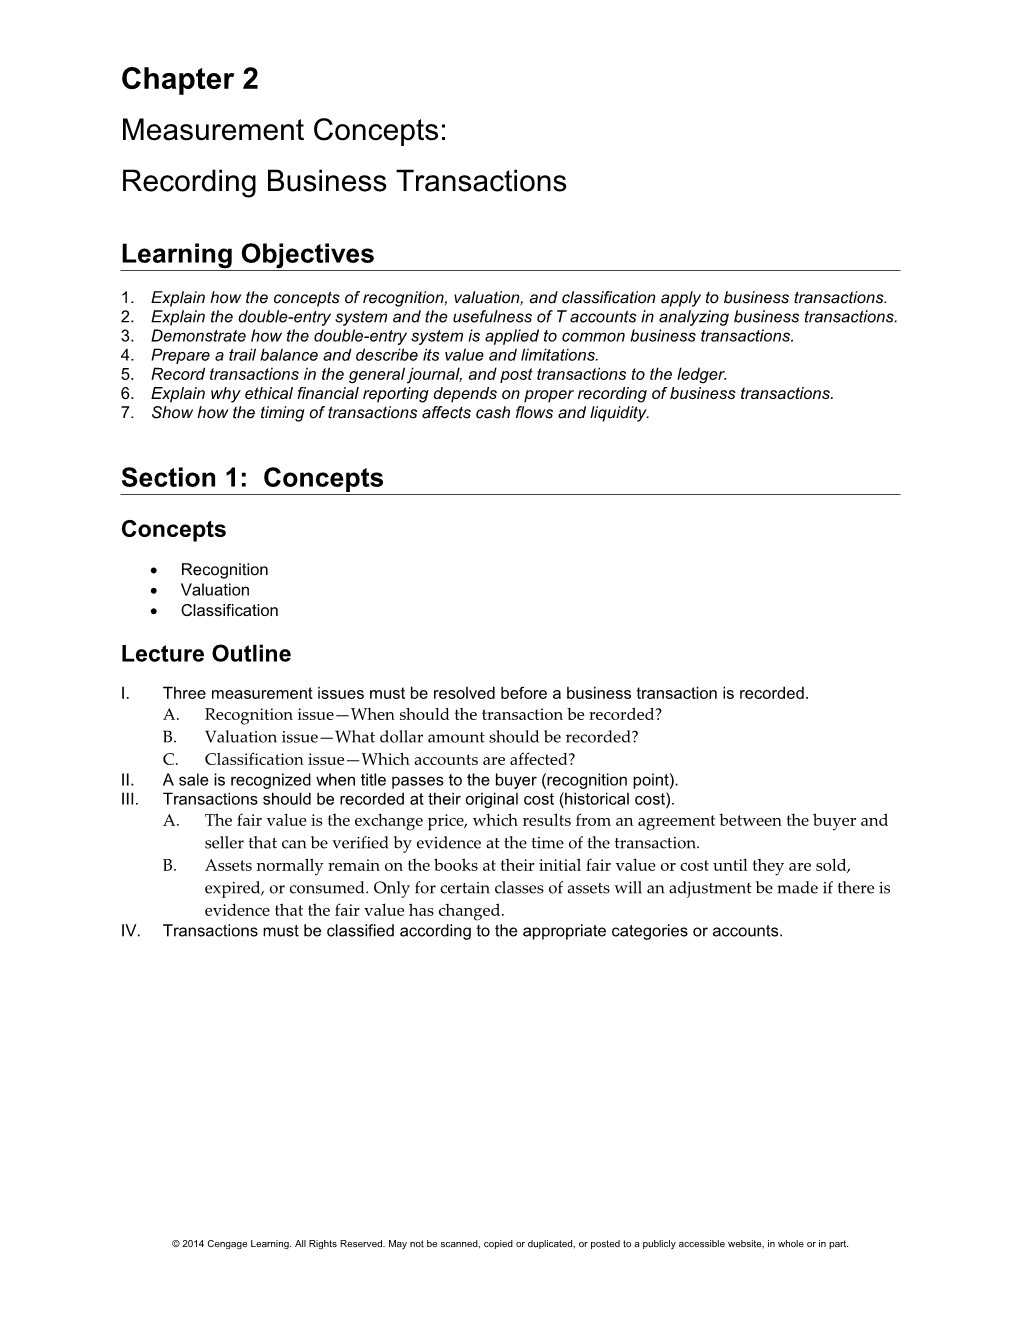 Chapter 2: Measurement Concepts: Recording Business Transactions Instructor S Manual 1